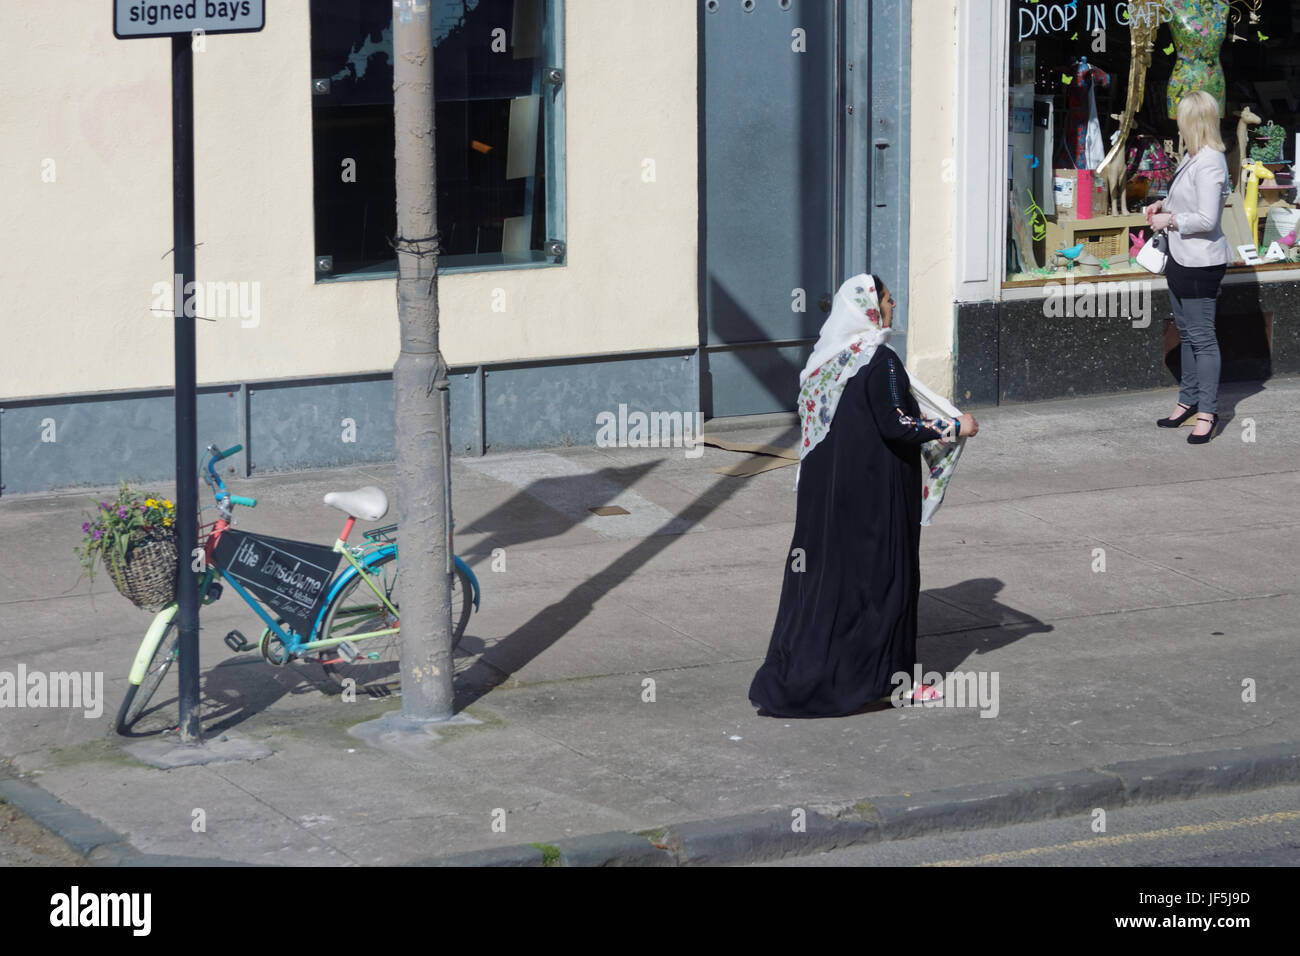 Asian family refugee dressed Hijab scarf on street in the UK everyday scene woman shopping Stock Photo